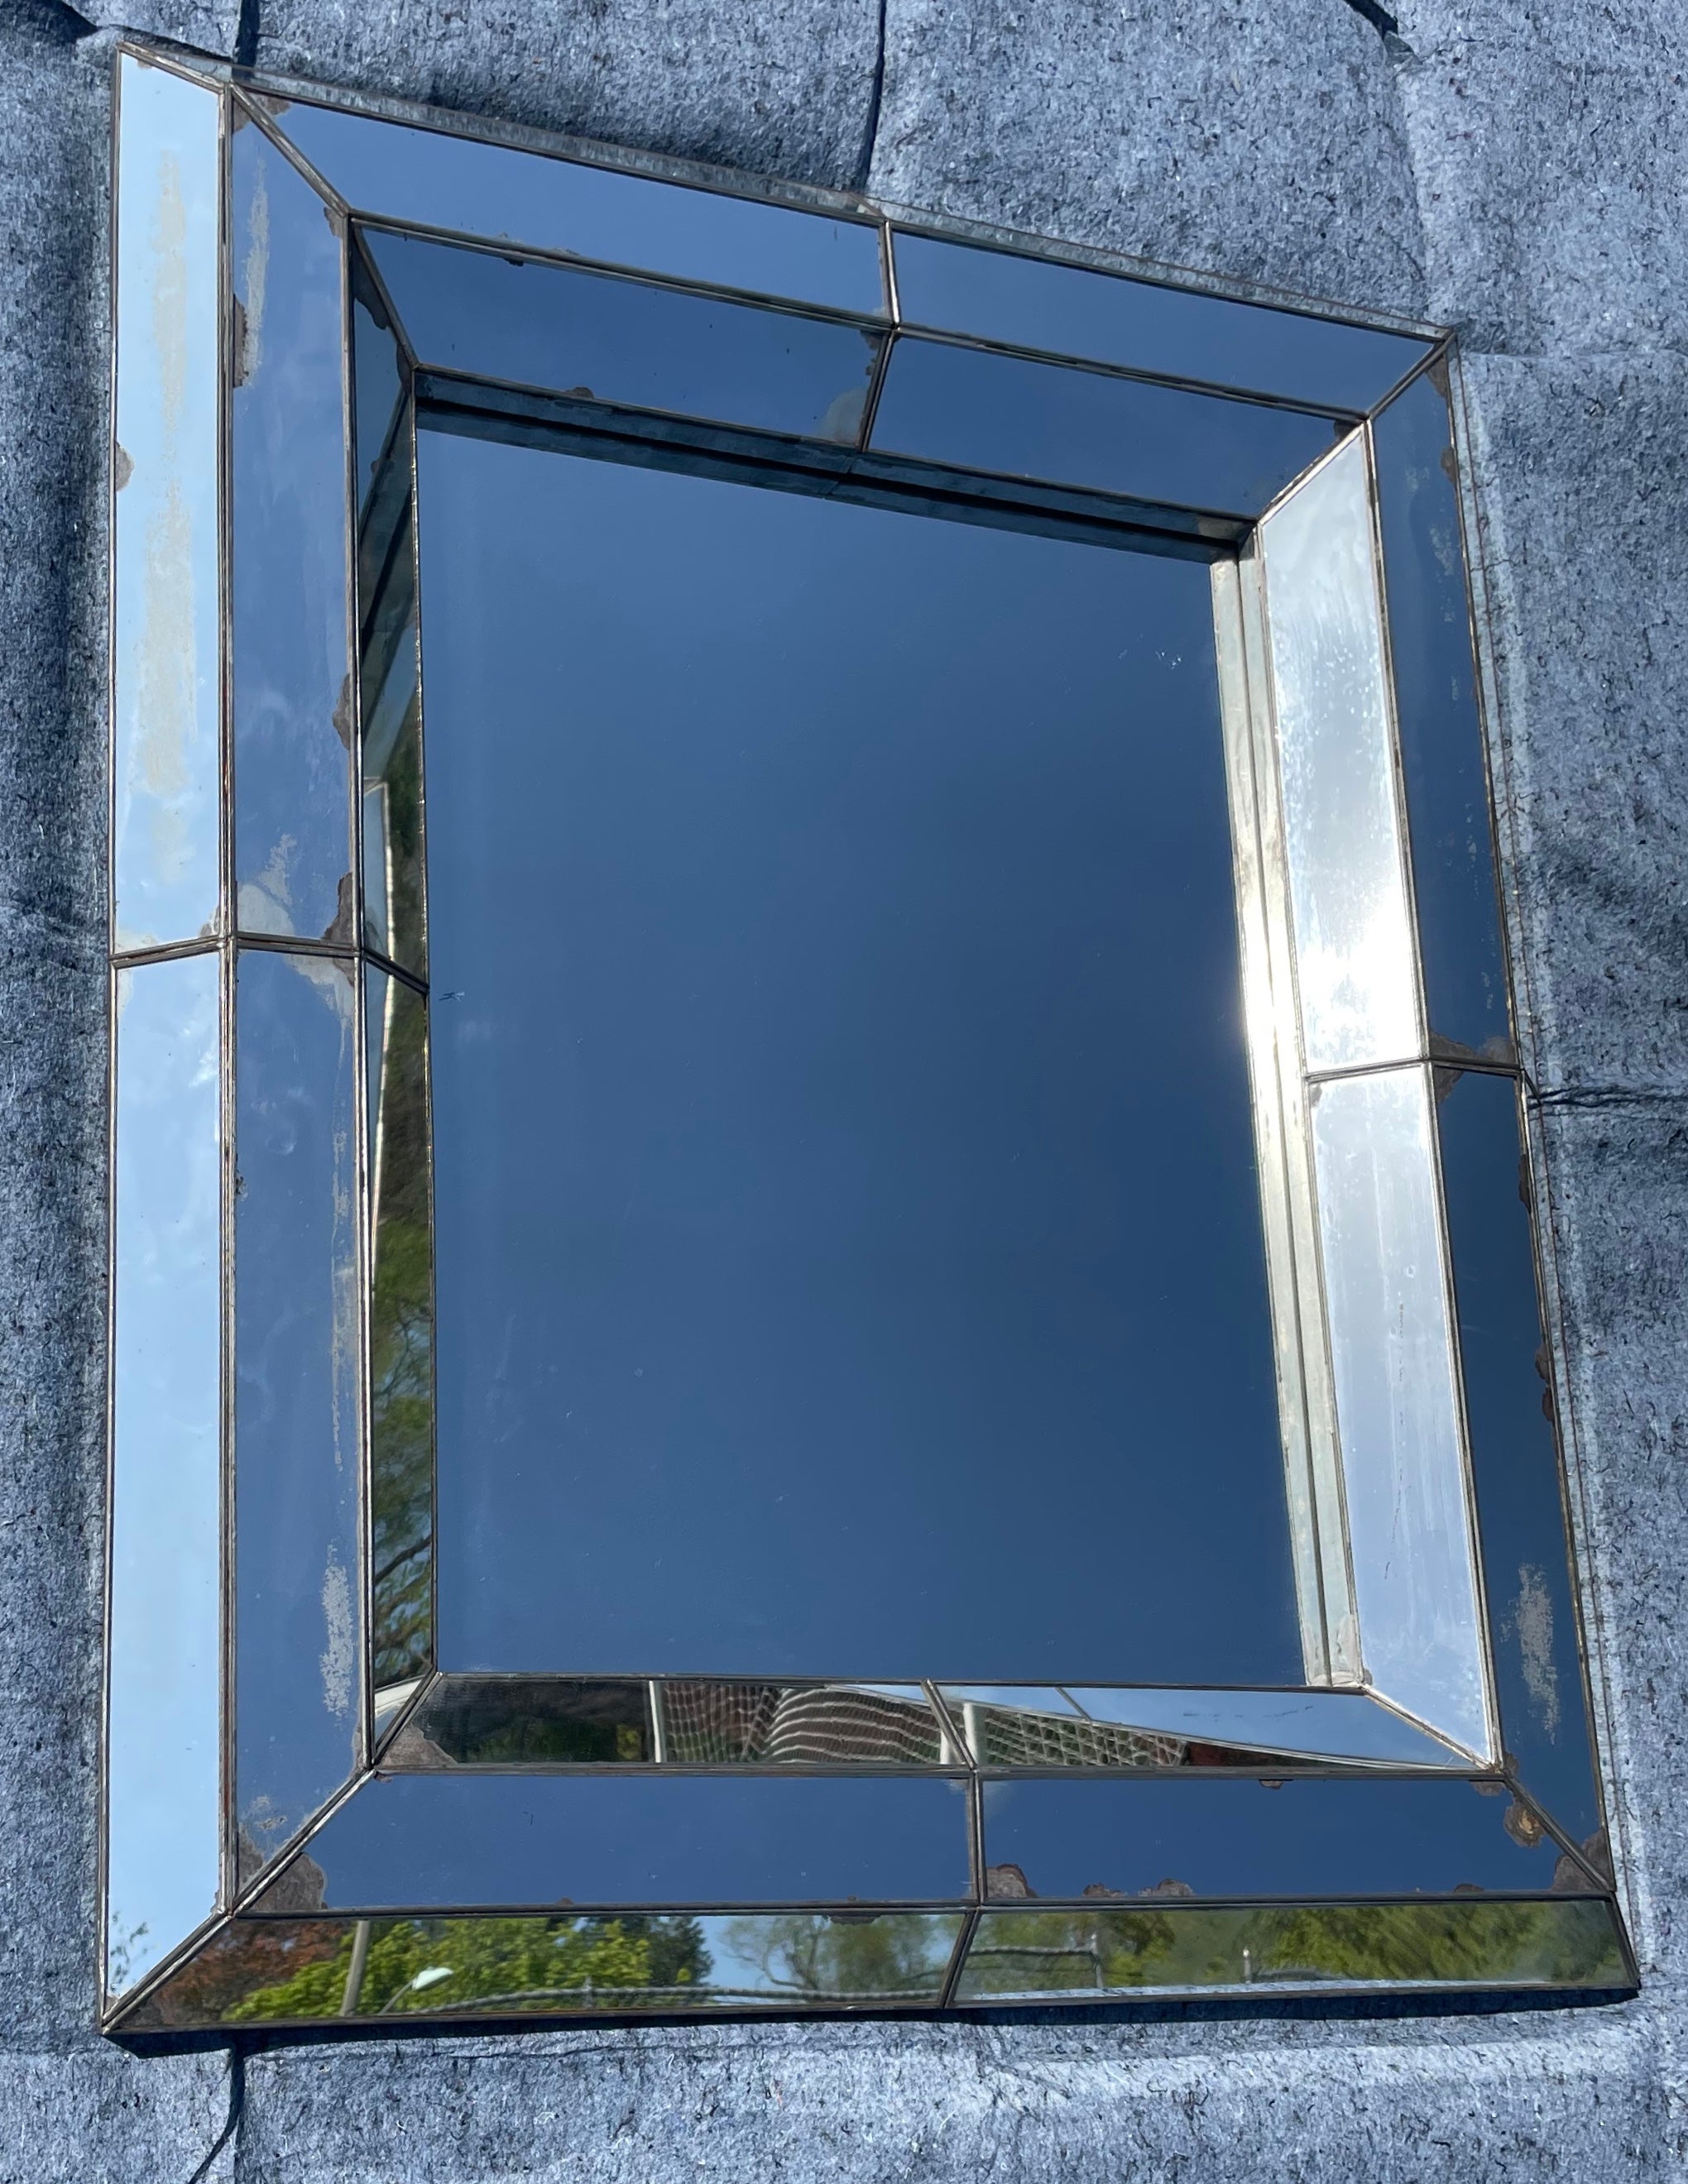 Large mercury glass Venetian style mirror. Vintage paneled box form Venetian mirror framed mirror with random distressed losses to mercury; elegant in both charming Continental and modern settings. Spain, Mid-20th Century
Dimensions: 36